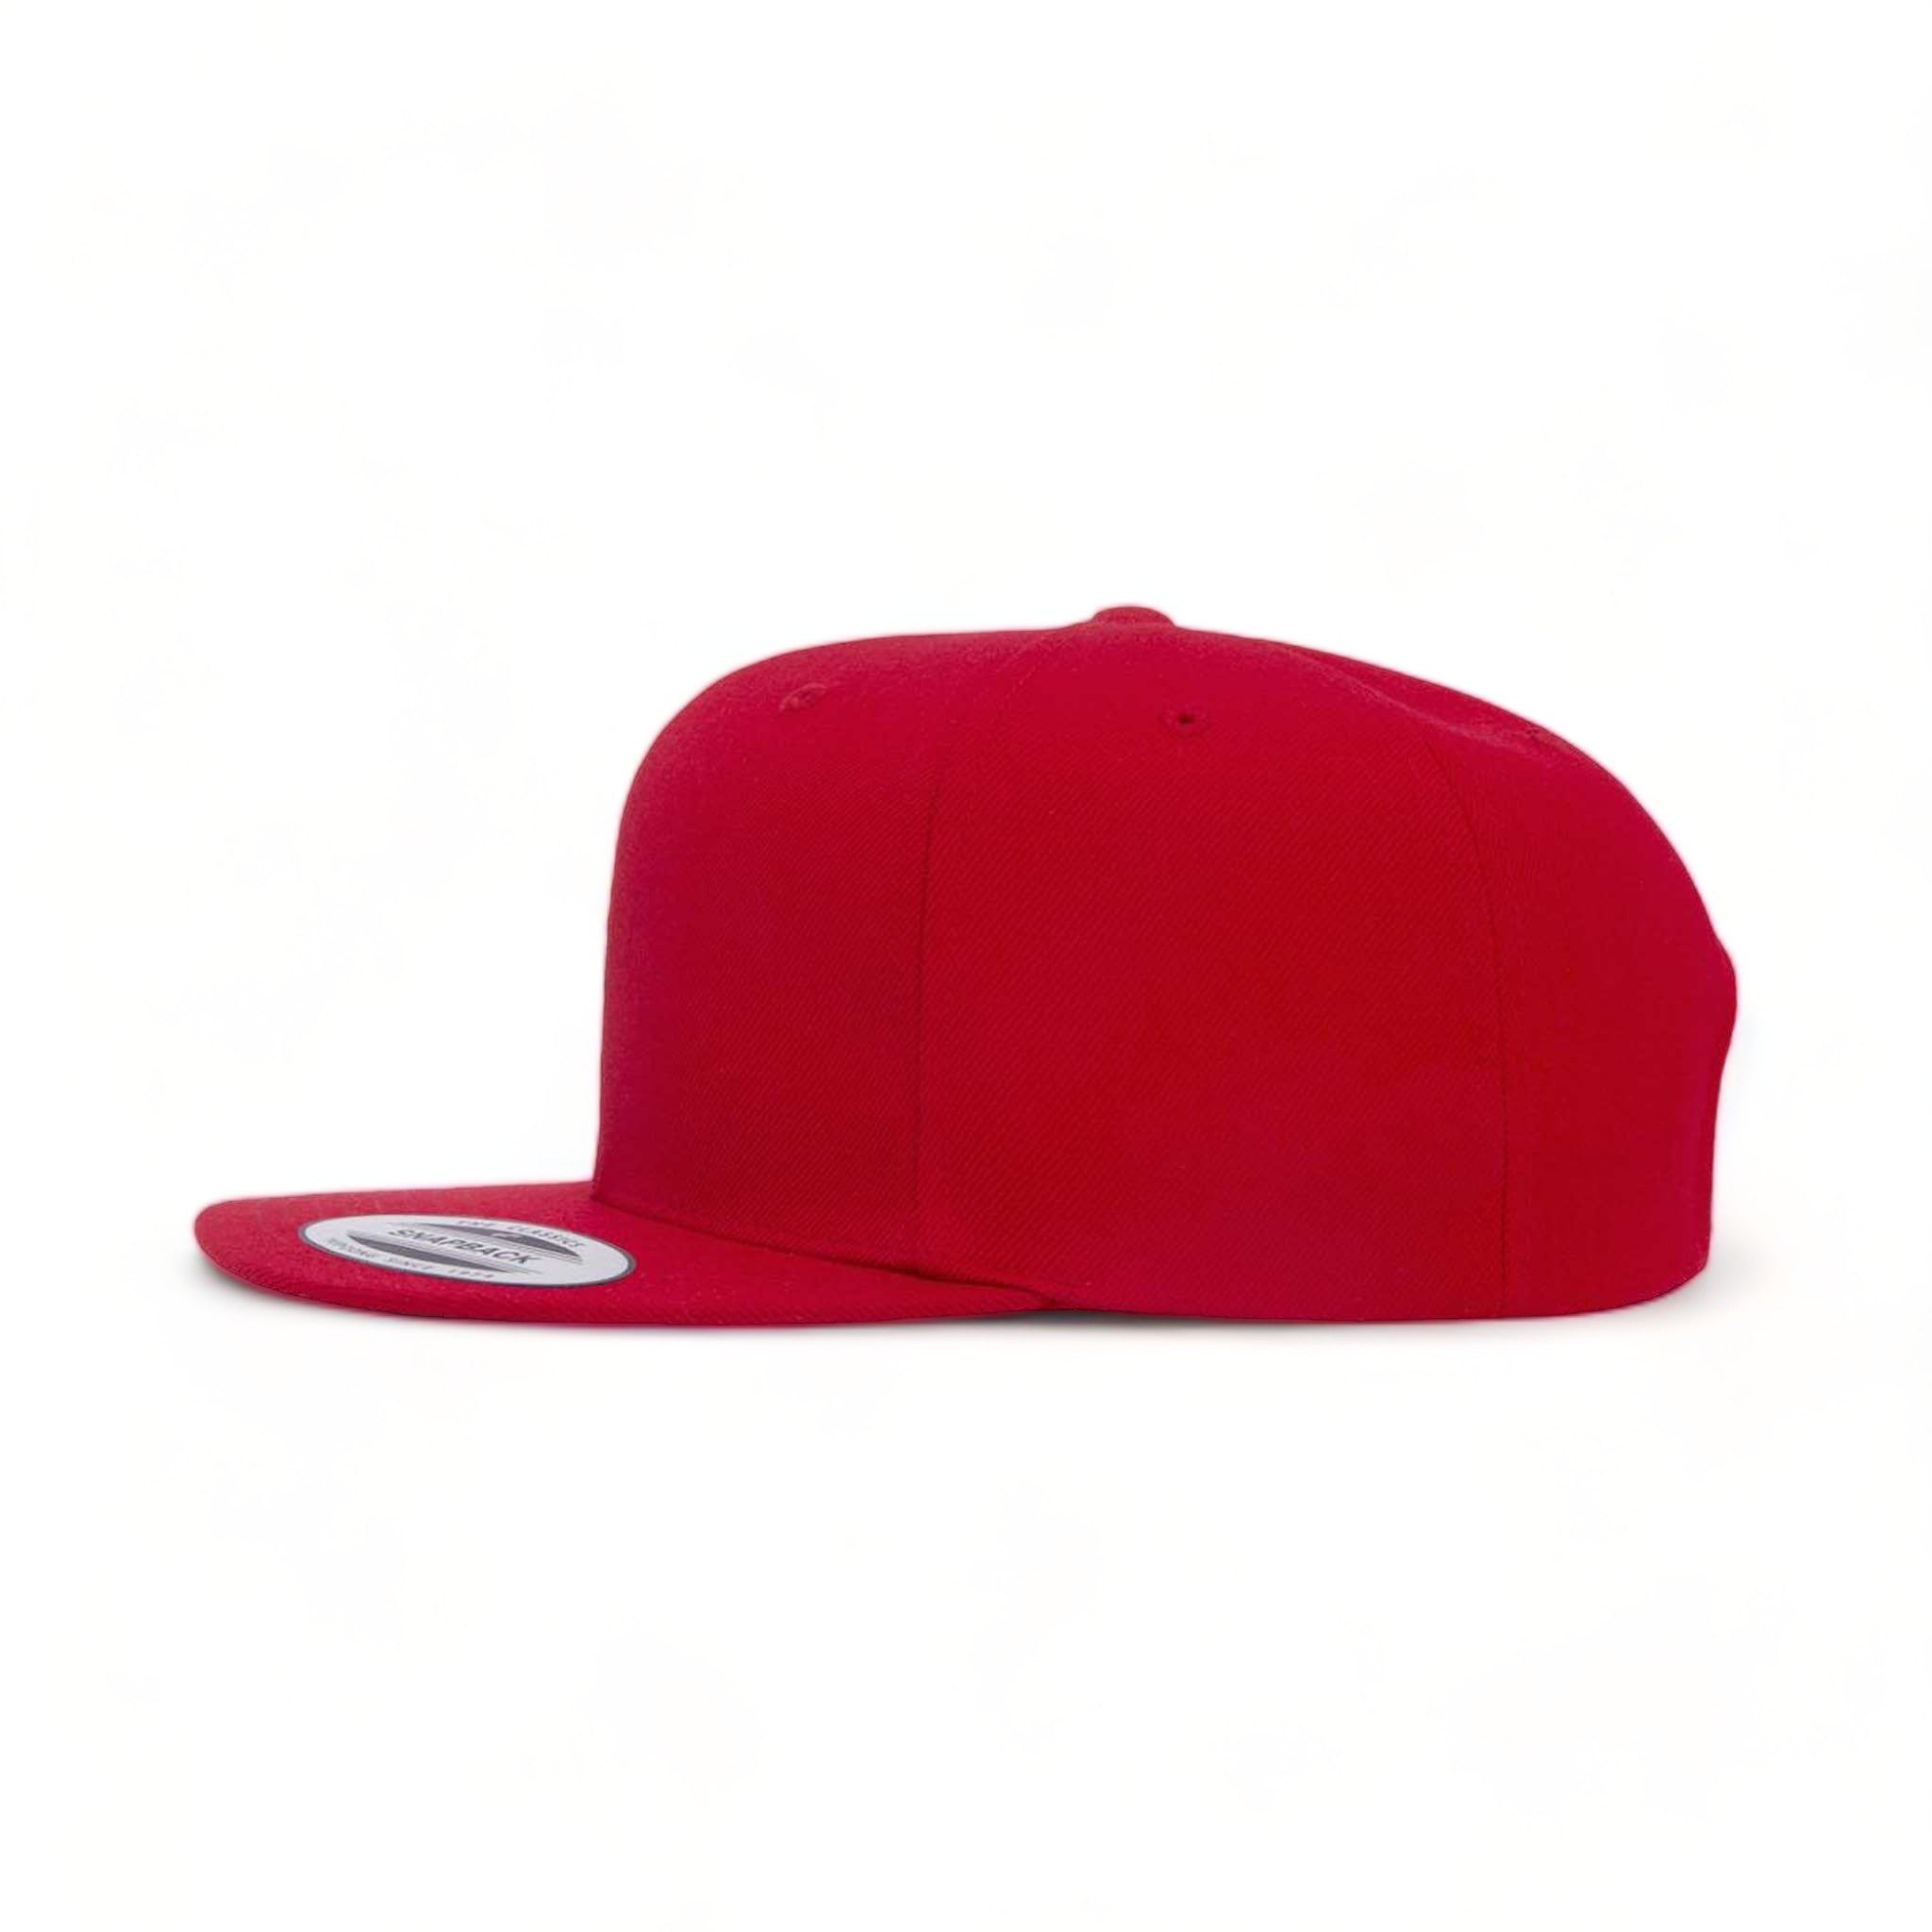 Side view of YP Classics 6089M custom hat in red